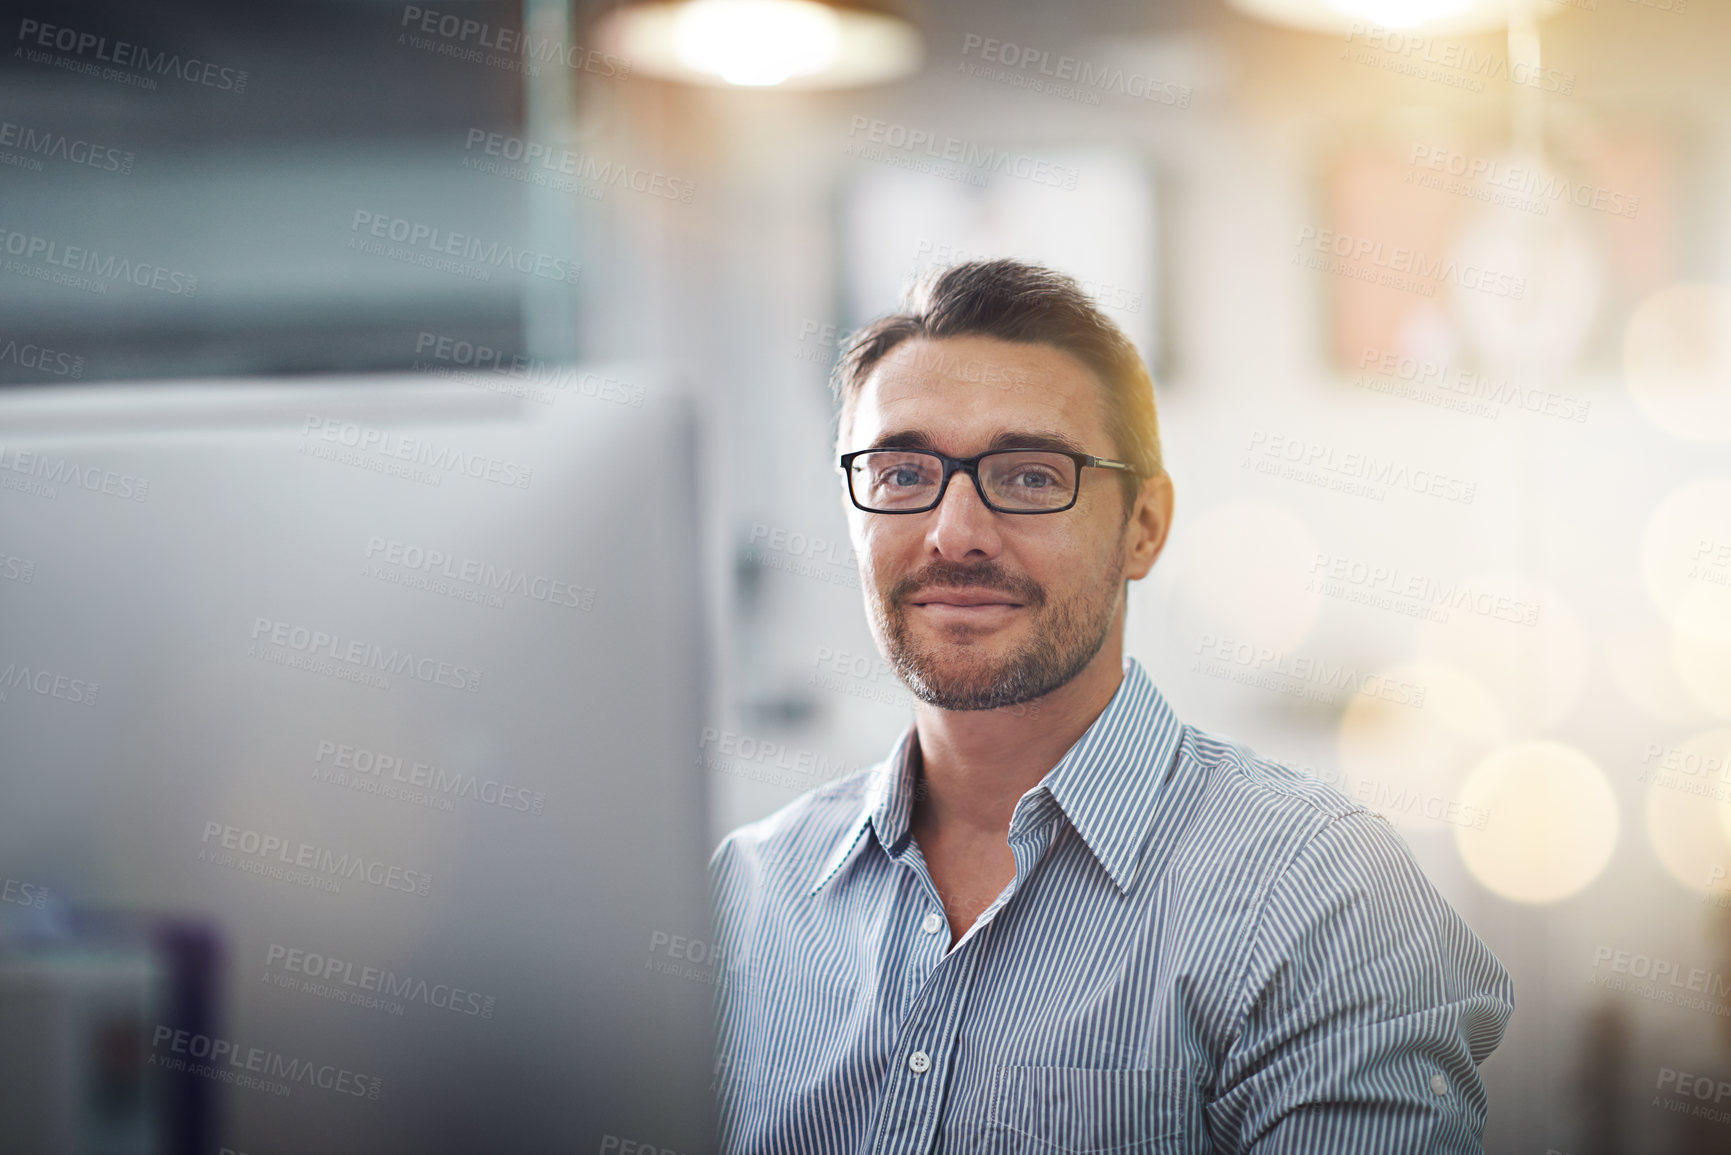 Buy stock photo Portrait of a businessman working at his desk